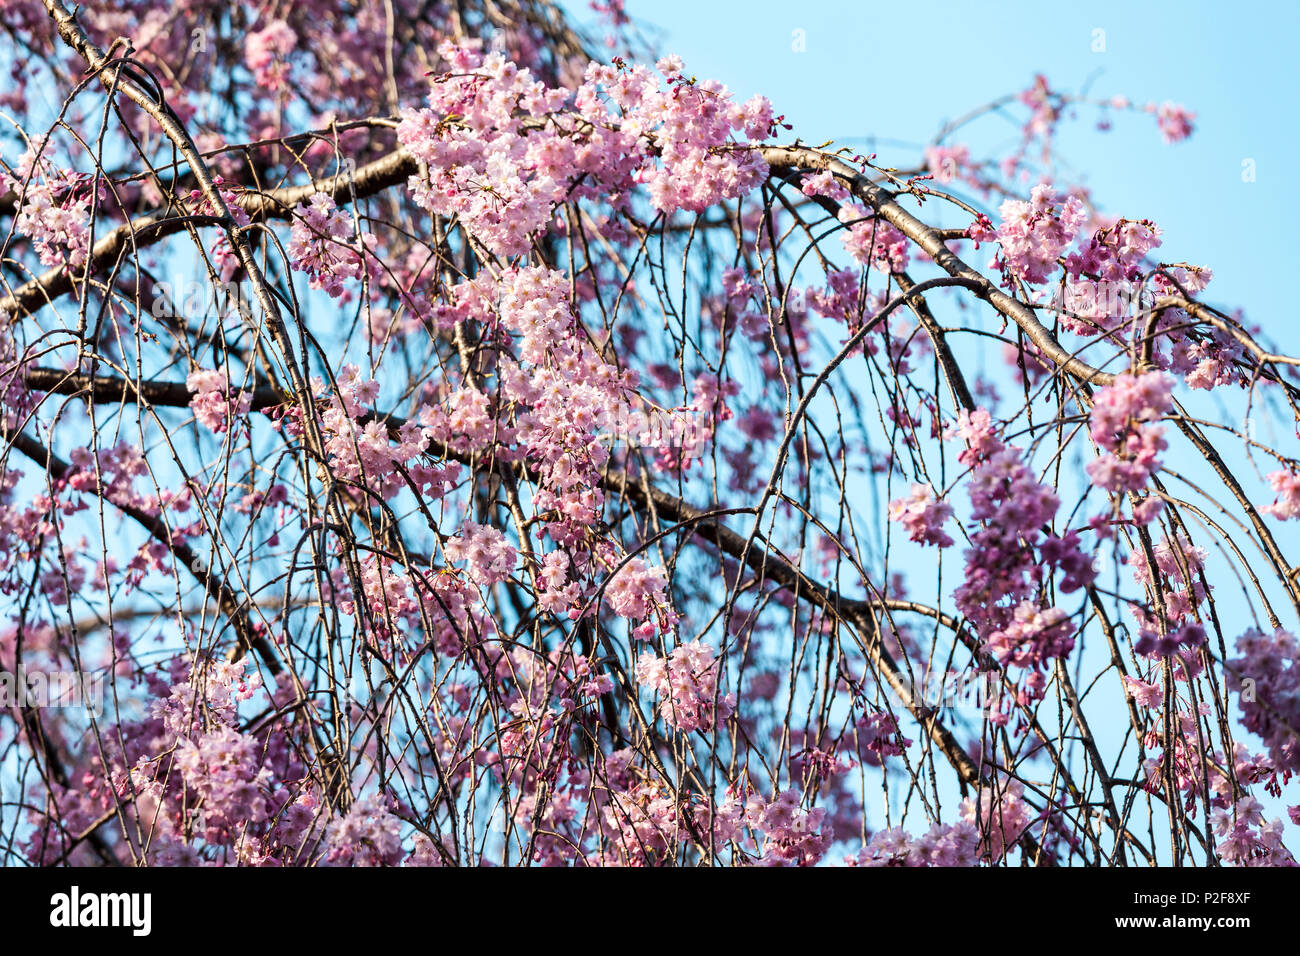 Branches of hanging cherry tree with blossoms against cyan sky, Bunkyo-ku, Tokyo, Japan Stock Photo